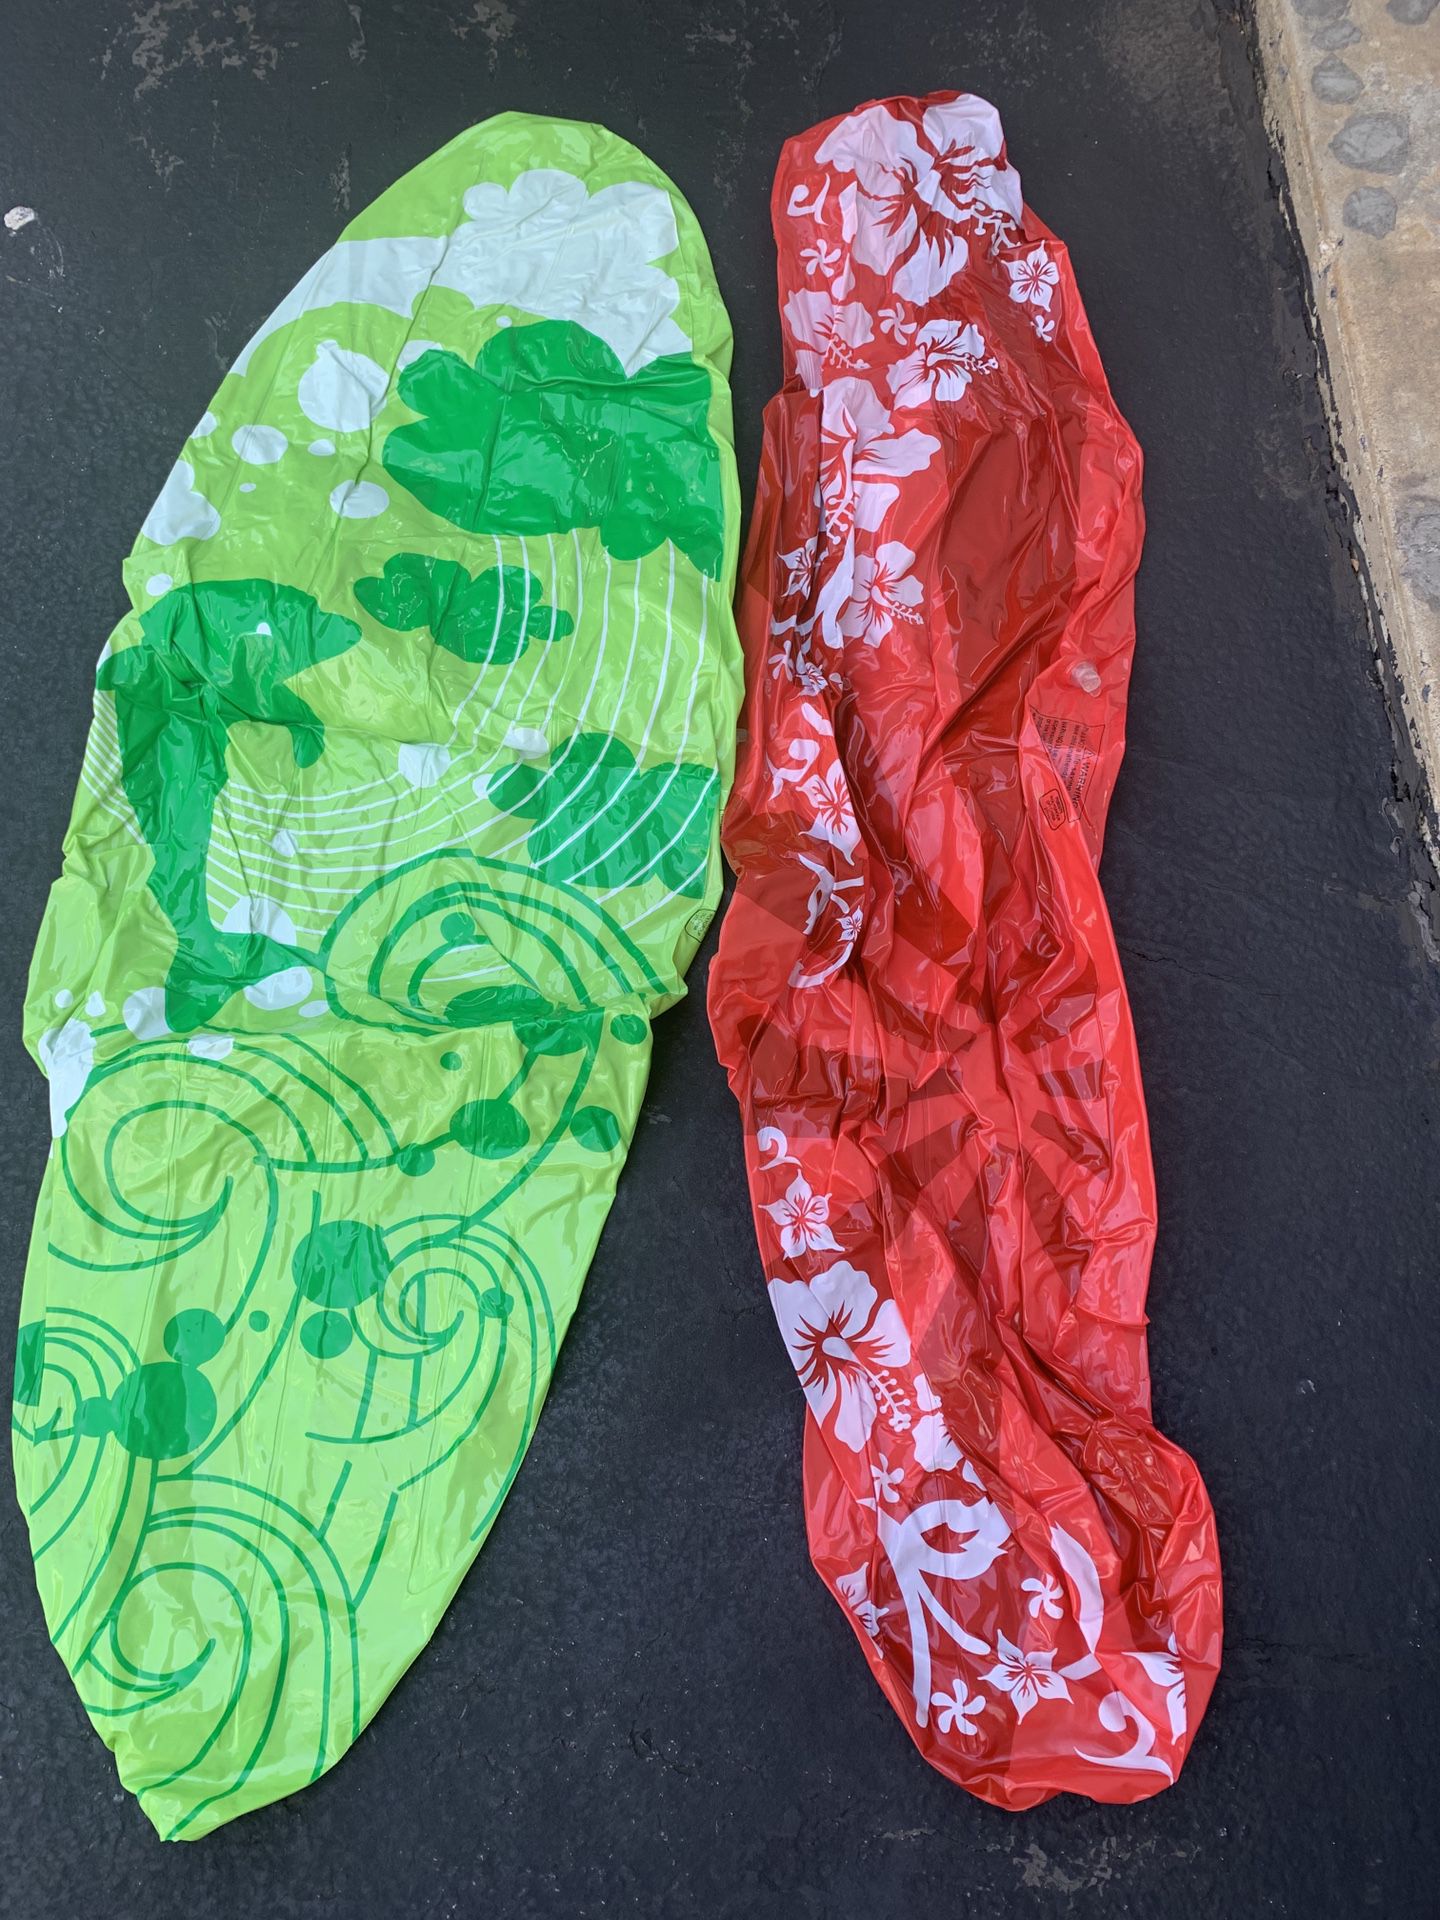 Two new blowup surfboards